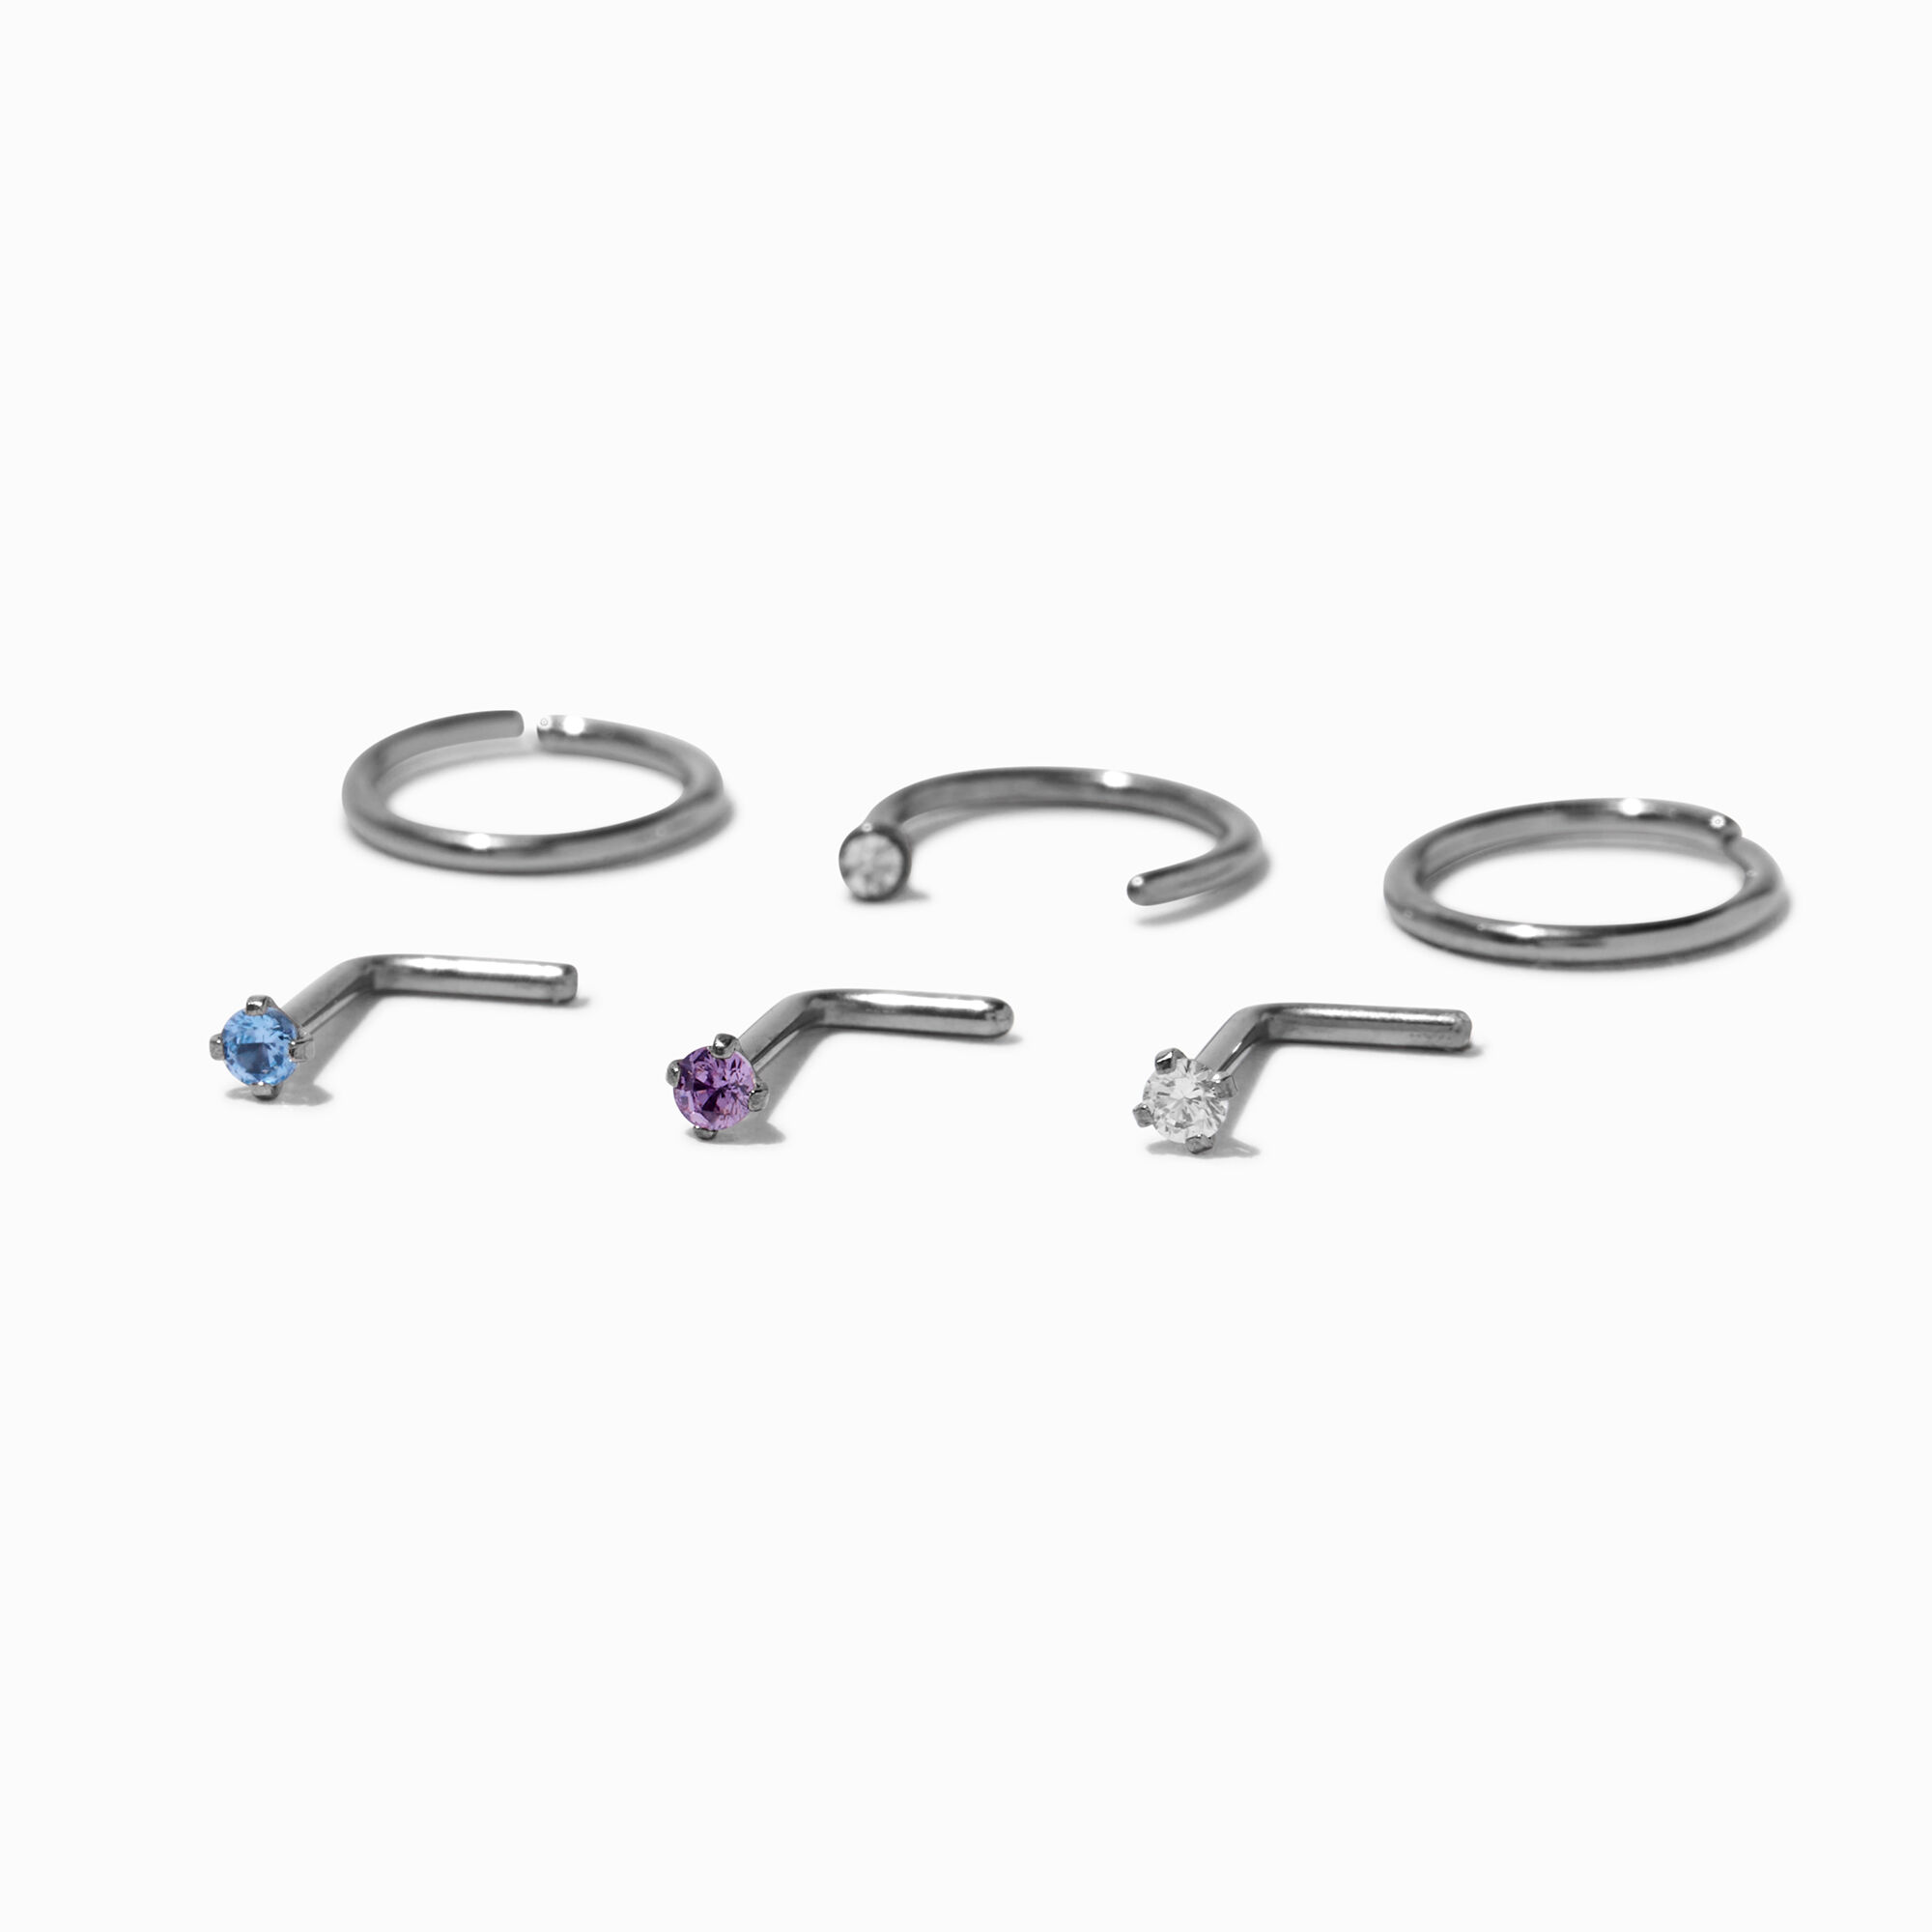 View Claires Mixed Crystal 18G Tone Titanium Nose Rings 6 Pack Silver information